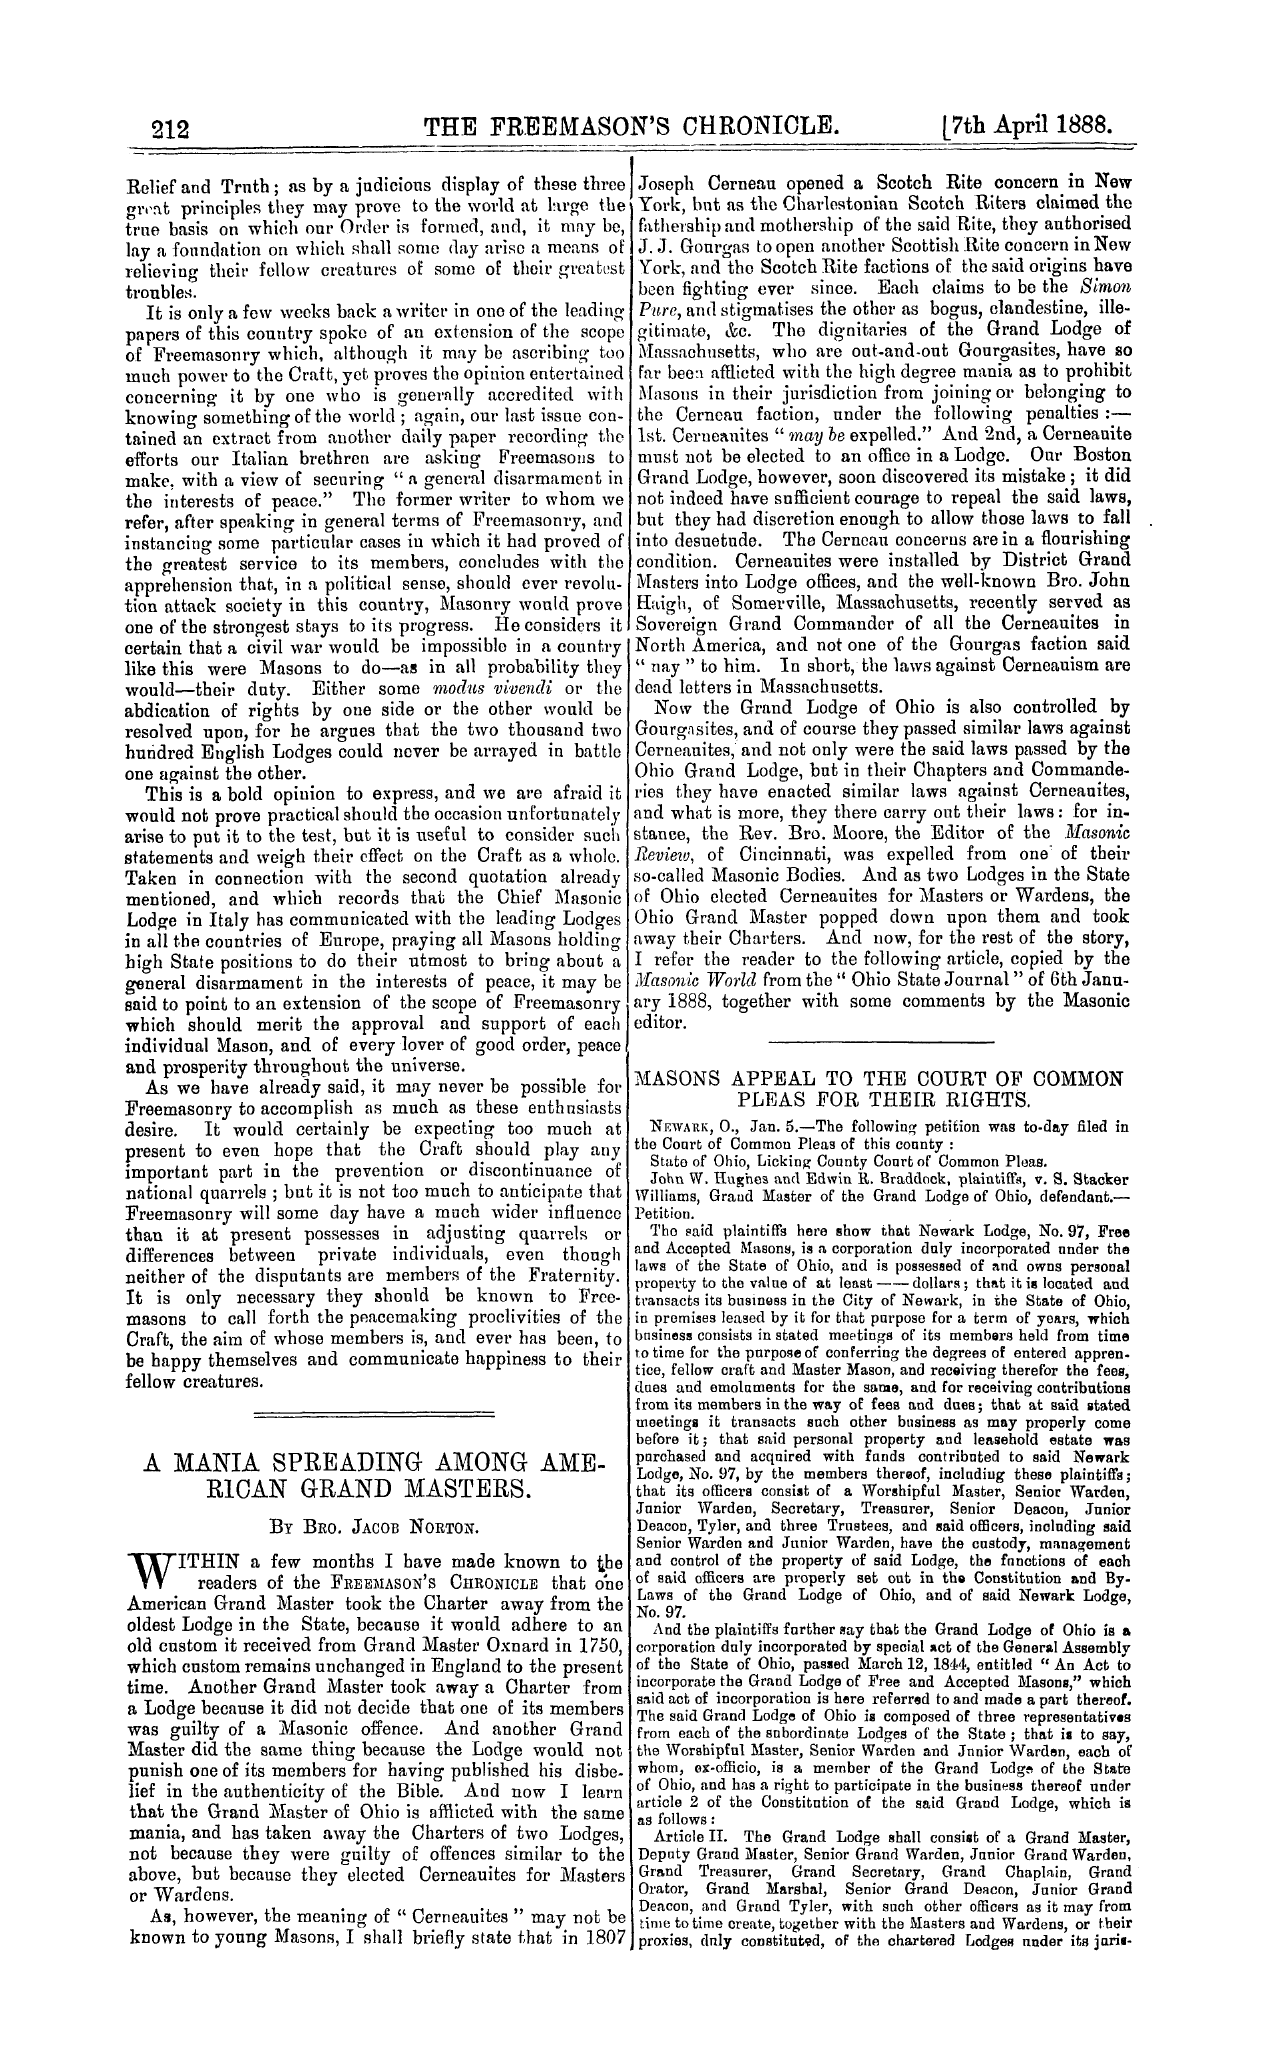 The Freemason's Chronicle: 1888-04-07 - Masons Appeal To The Court Of Common Pleas For Their Rights.